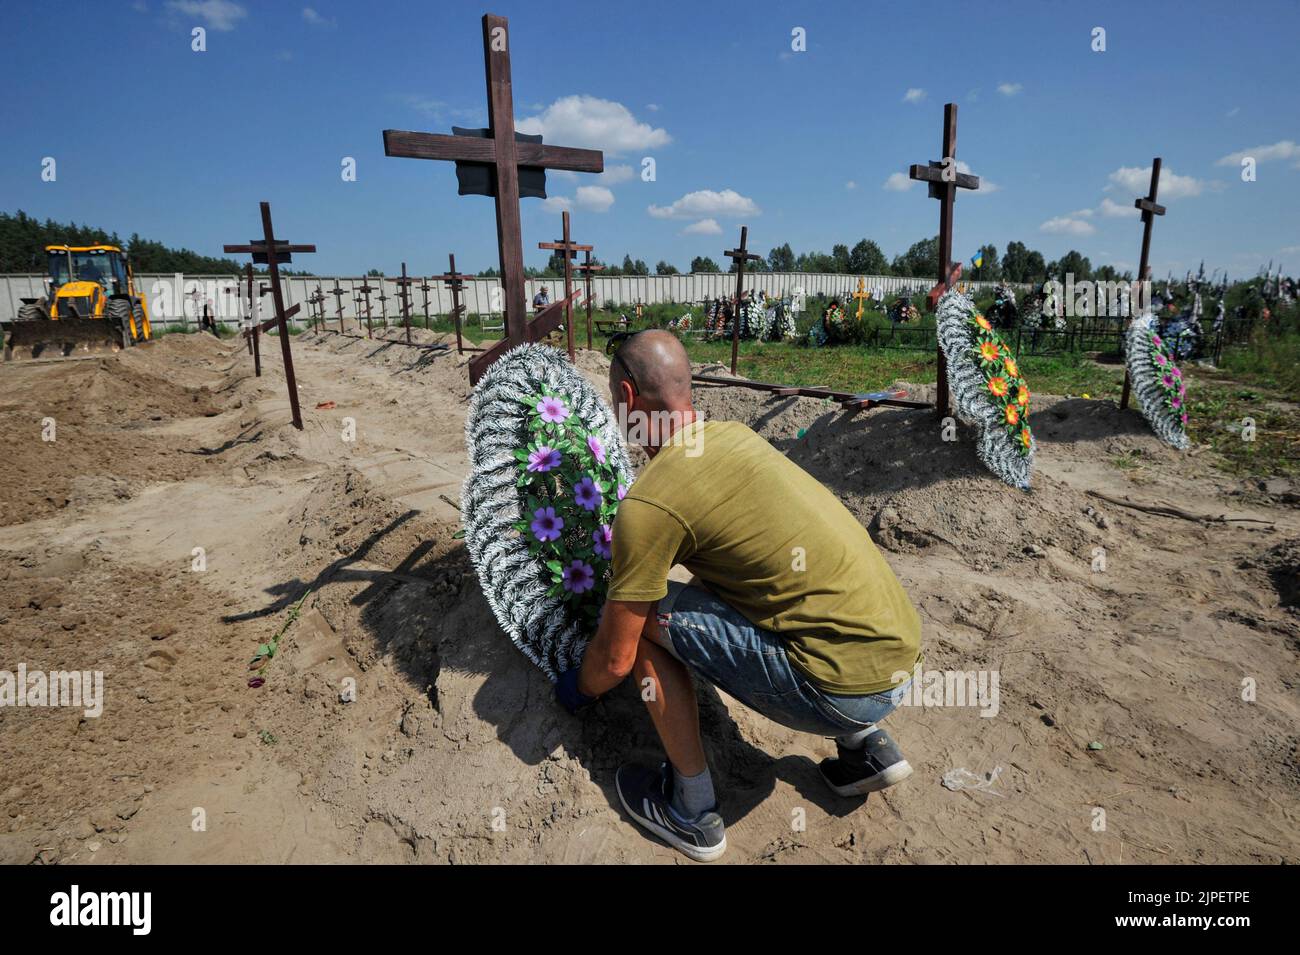 A municipal worker sets a wreath on the grave of an unidentified person who was killed by the Russian military during the occupation of the city of Bucha. On Wednesday, 21 unidentified people who were killed by the Russian military in February-March 2022 were buried at the local cemetery. Russia invaded Ukraine on 24 February 2022, triggering the largest military attack in Europe since World War II. Stock Photo